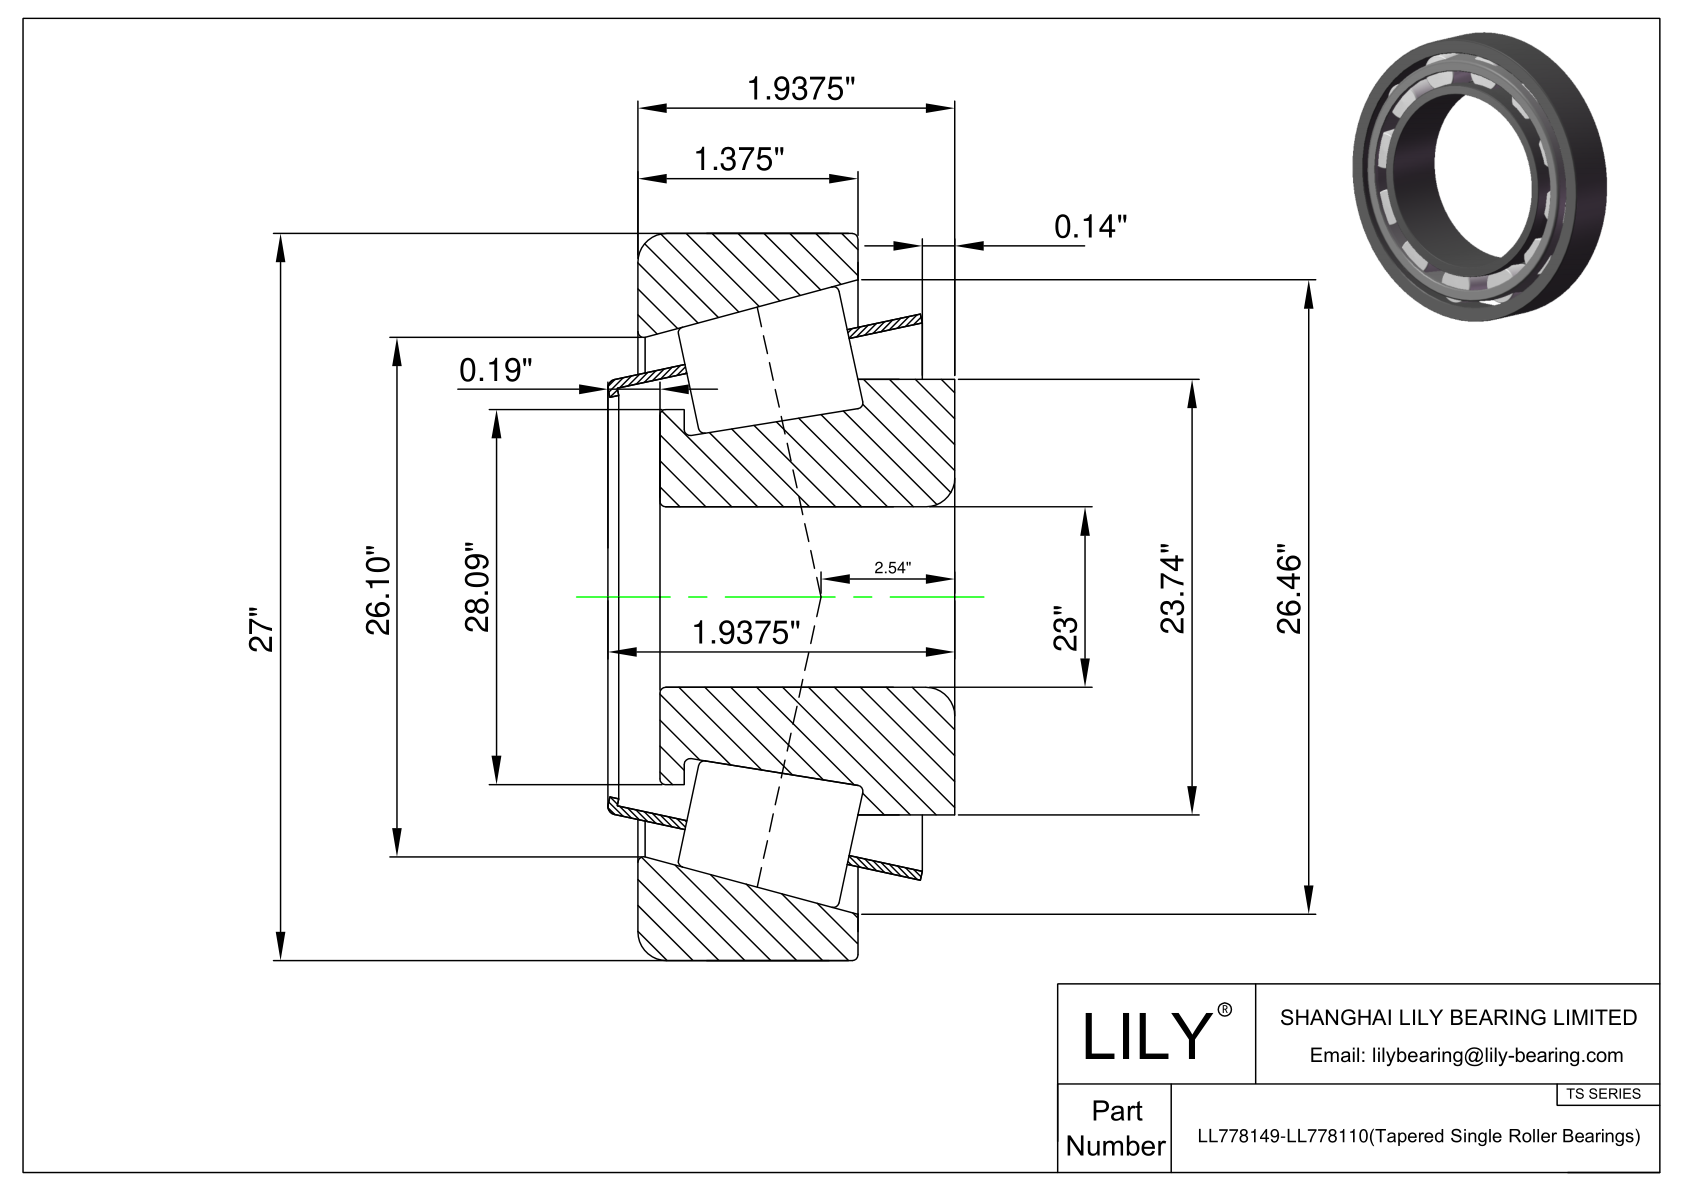 LL778149-LL778110 TS (Tapered Single Roller Bearings) (Imperial) cad drawing